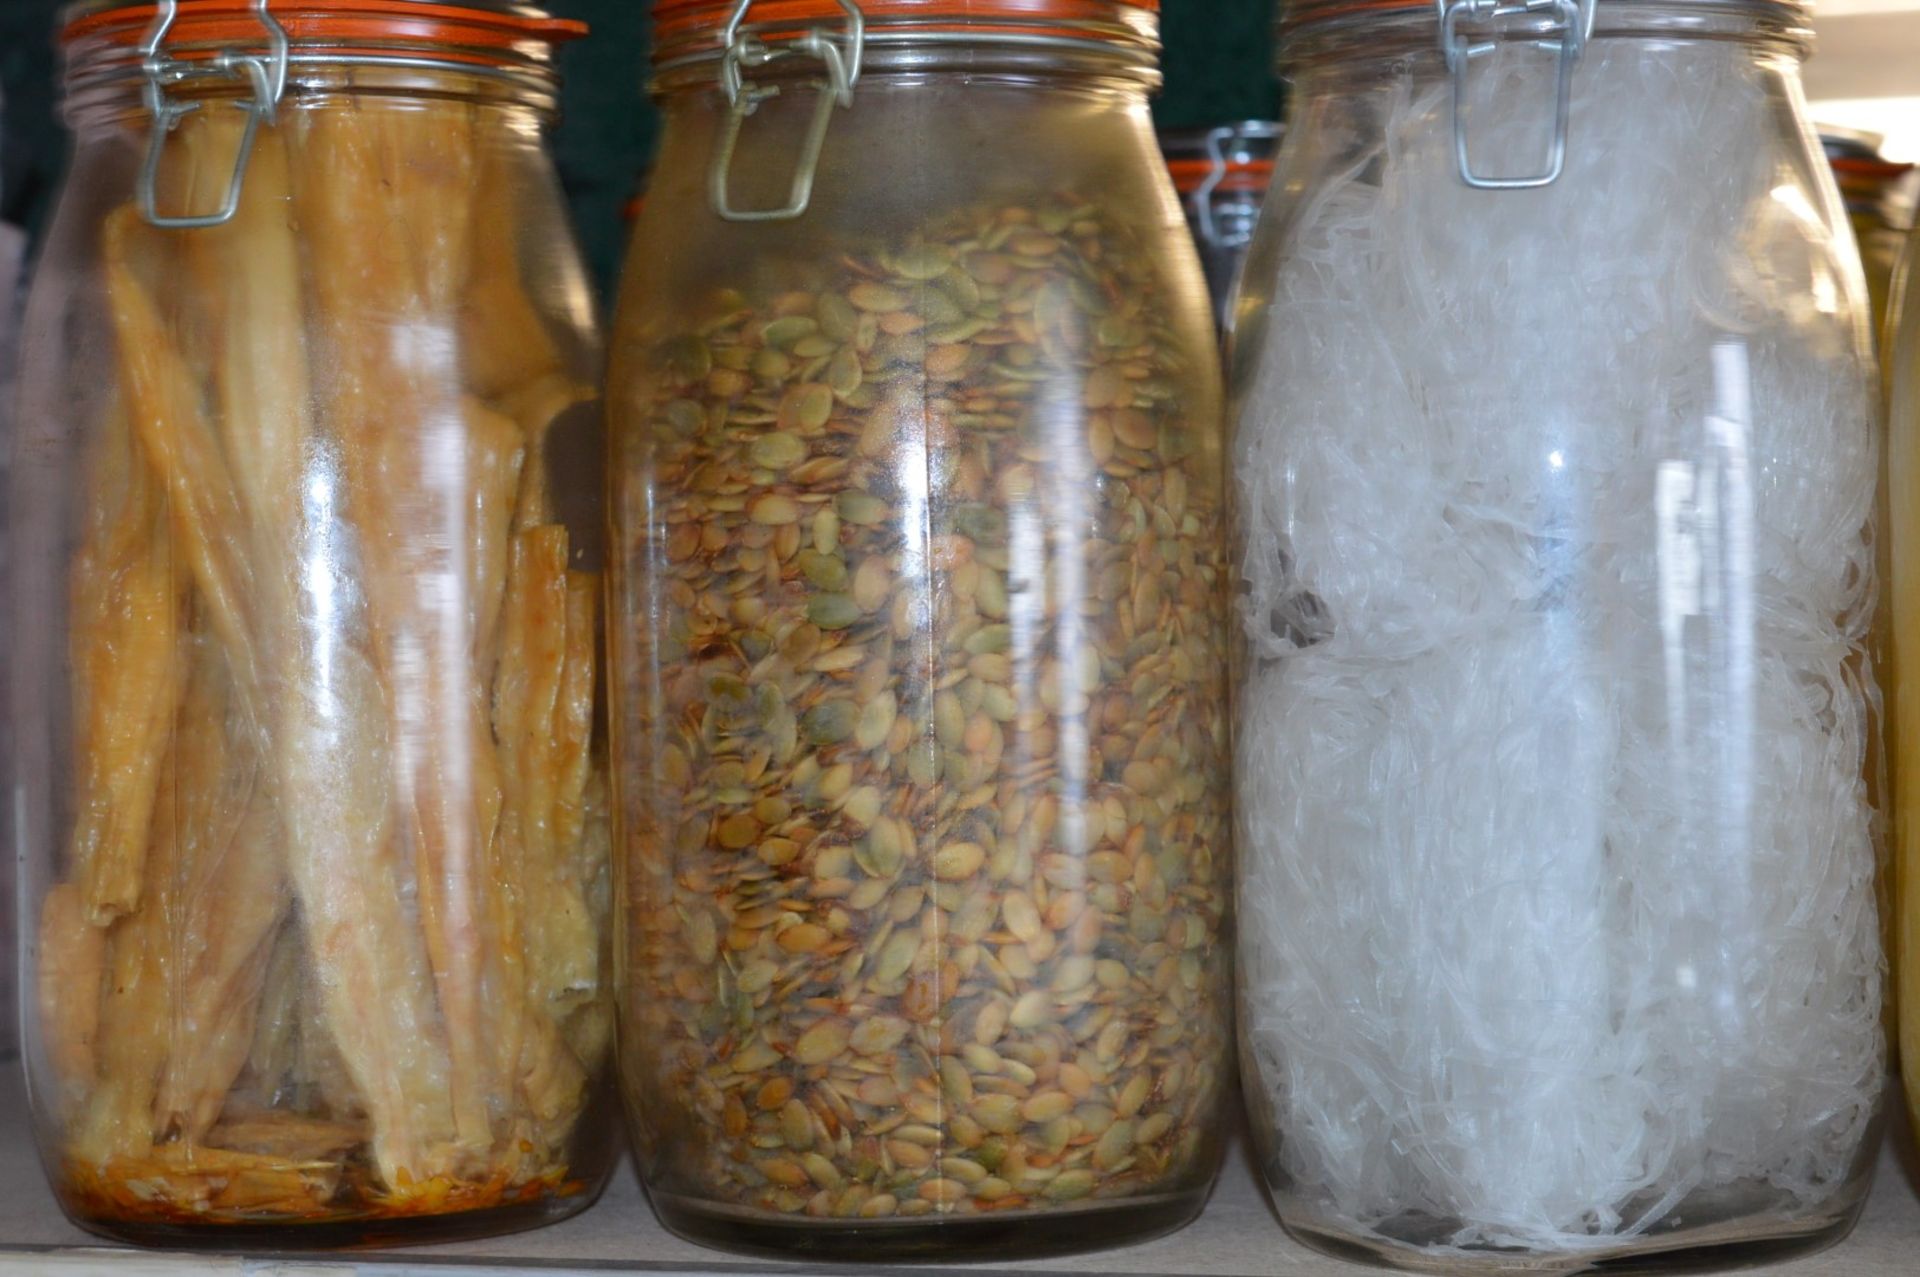 10 x Swing Top Jars With Deorative Spice Contents - Large Jars With Swing Top Lids - Size 28cm - Image 4 of 7